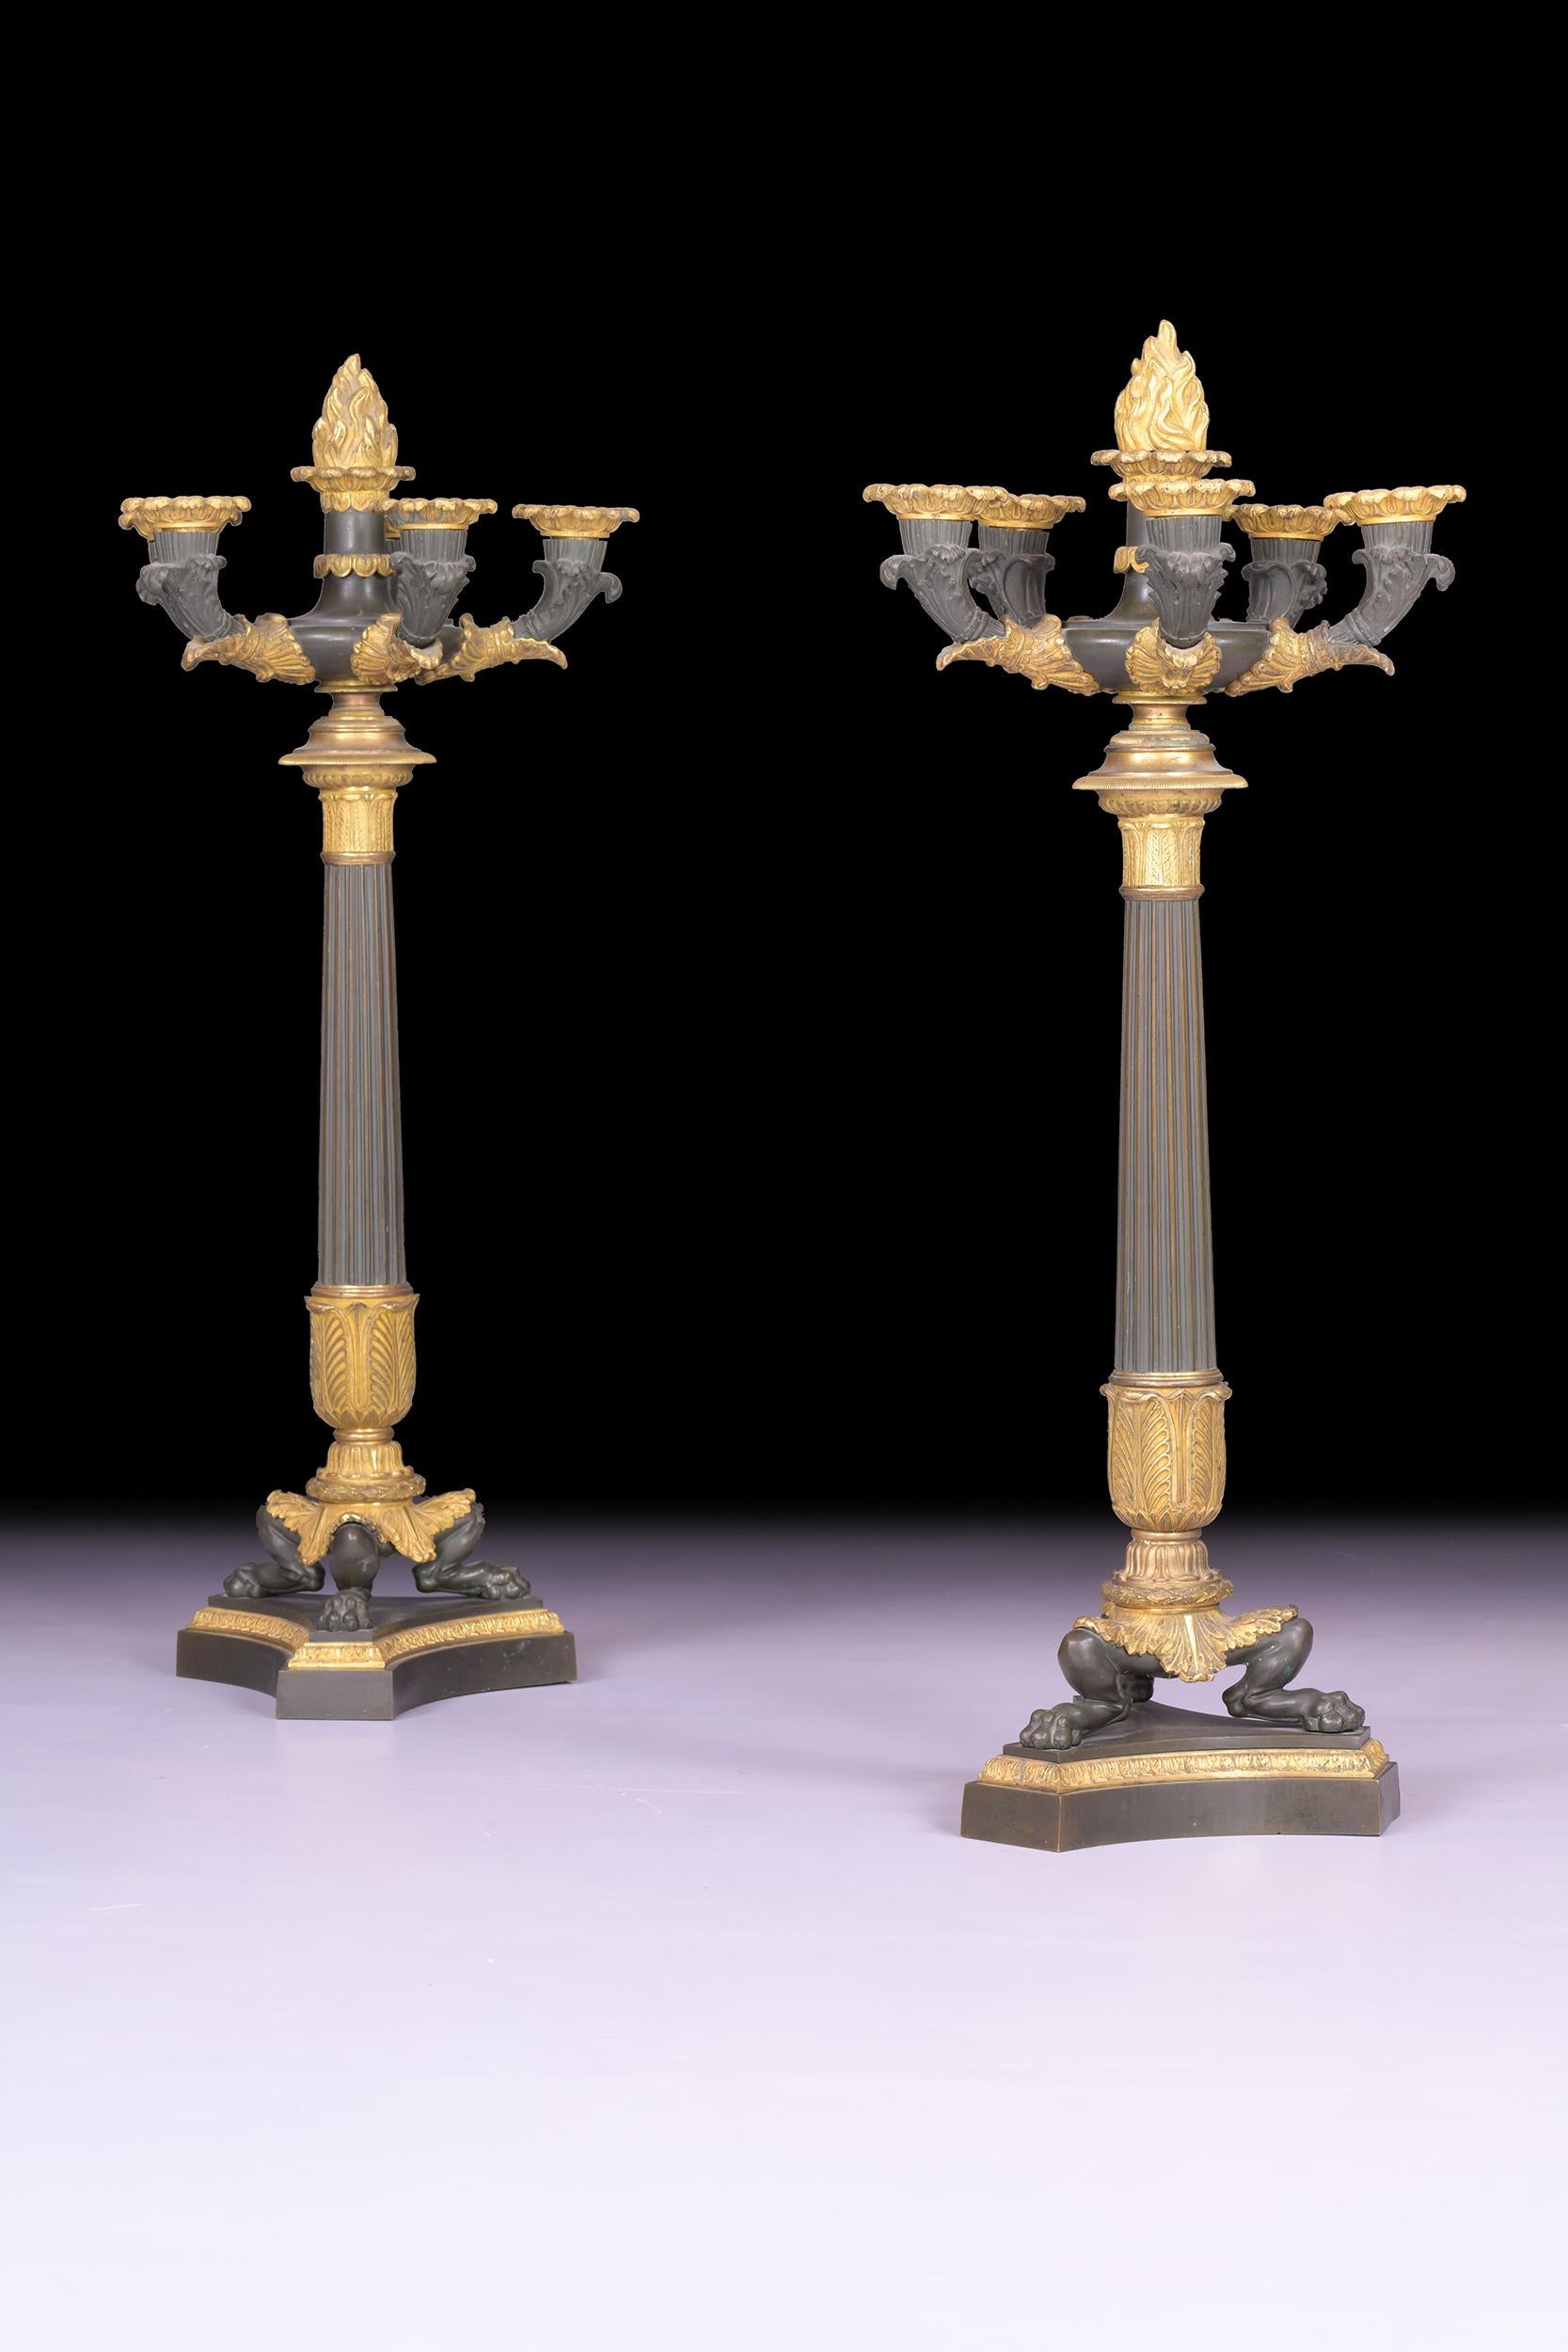 An exceptional pair of early 19th century bronze and ormolu six light candelabra, each with scrolling foliate branches above tapering reeded stems, on beautifully decorated lion's feet with acanthus leaves. resting on triform bases.

Circa